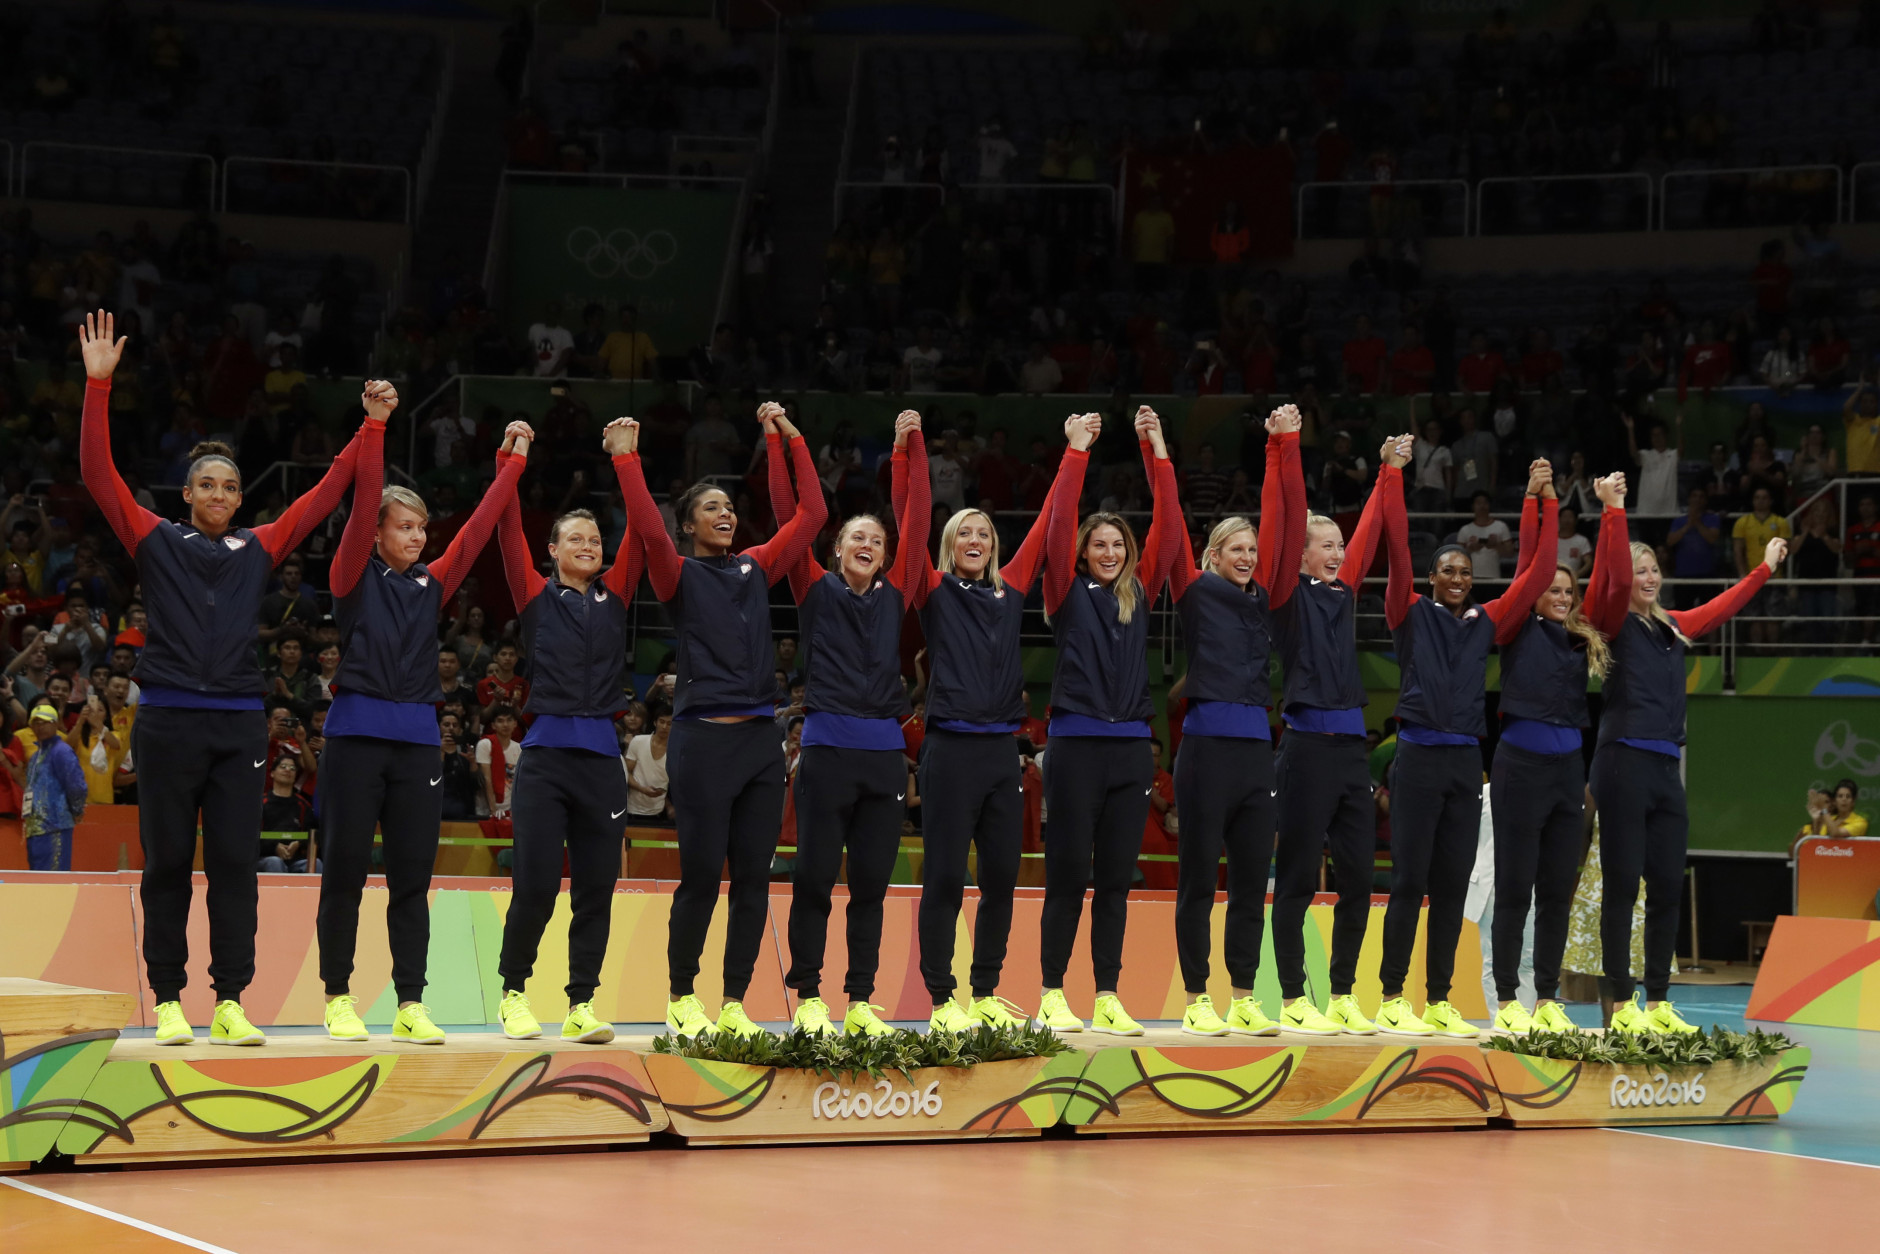 Members of the United States team take the stand to receive their bronze medals during an awarding ceremony for women's volleyball at the 2016 Summer Olympics in Rio de Janeiro, Brazil, Sunday, Aug. 21, 2016. (AP Photo/Matt Rourke)